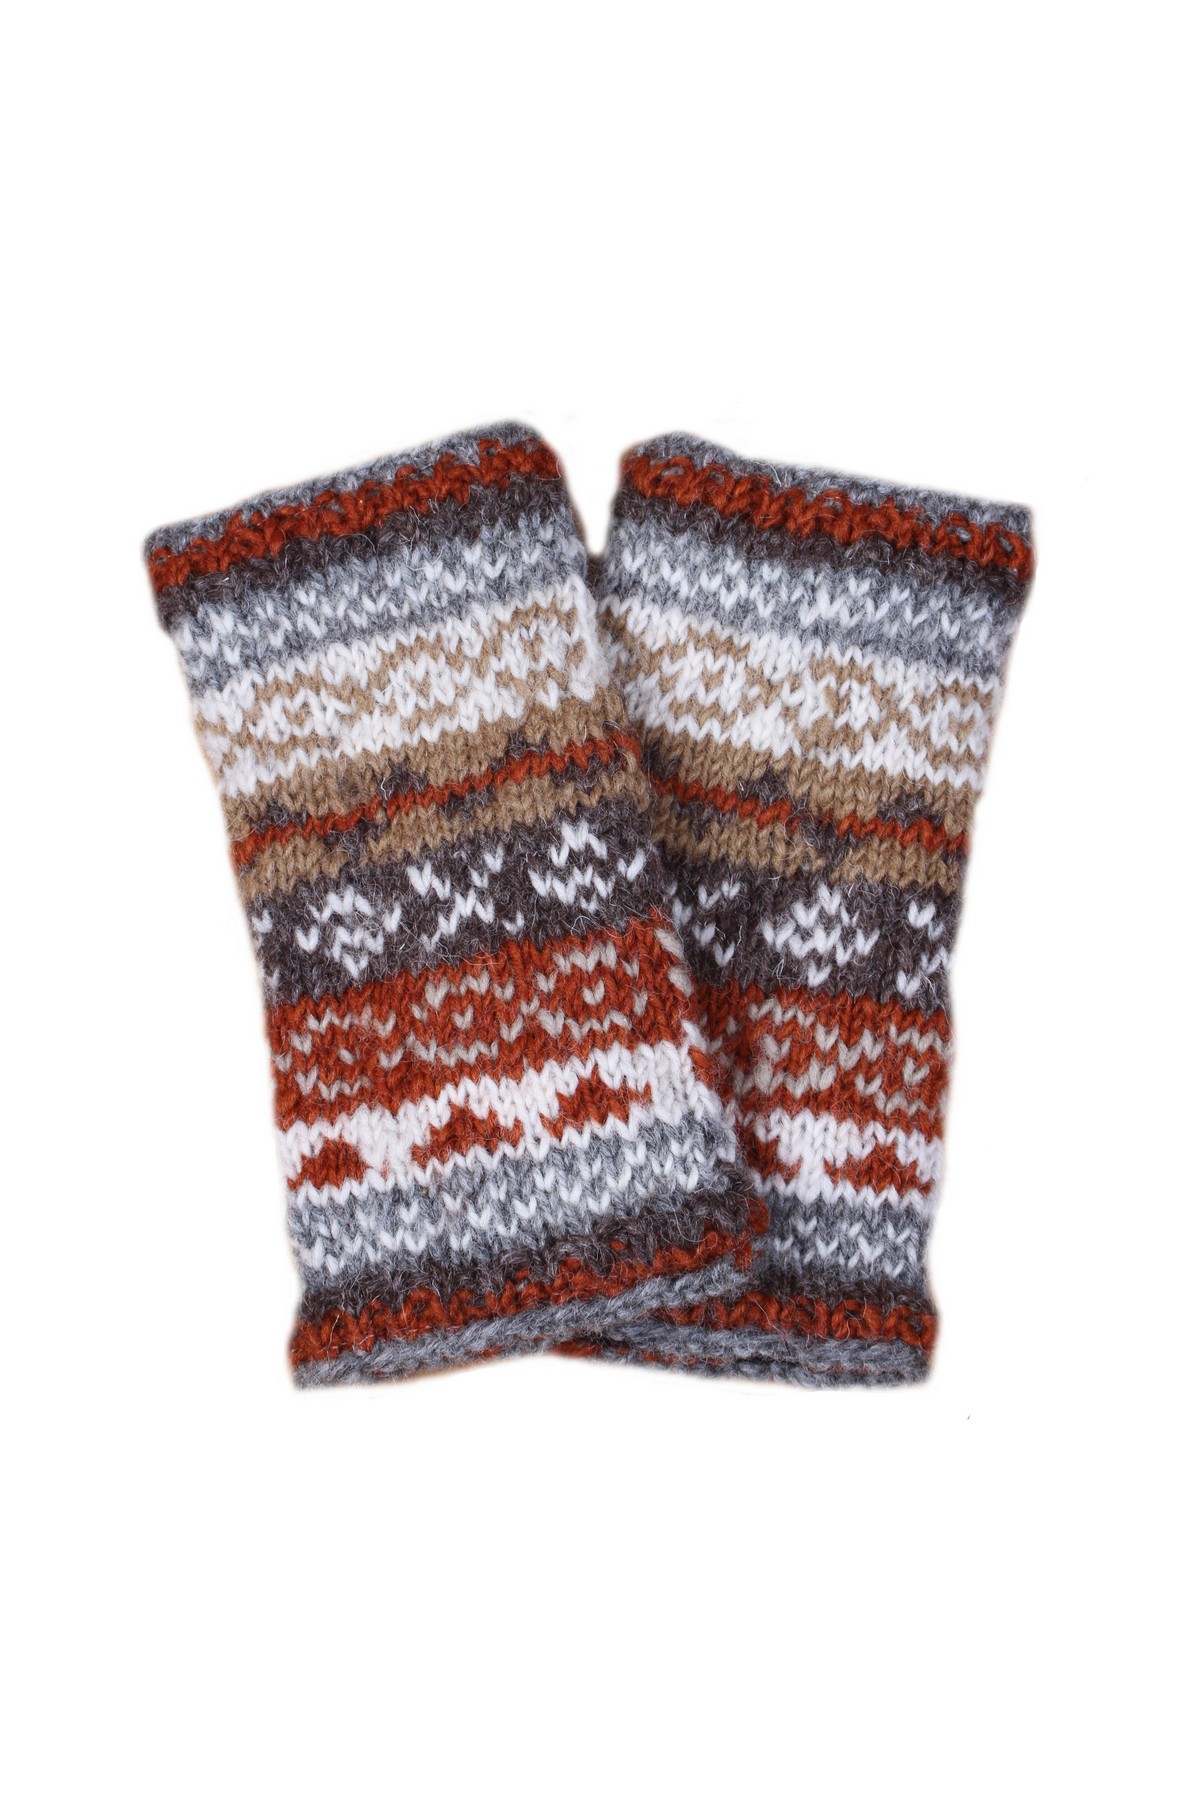 Pachamama Finisterre Handwarmers In A Choice of Colours